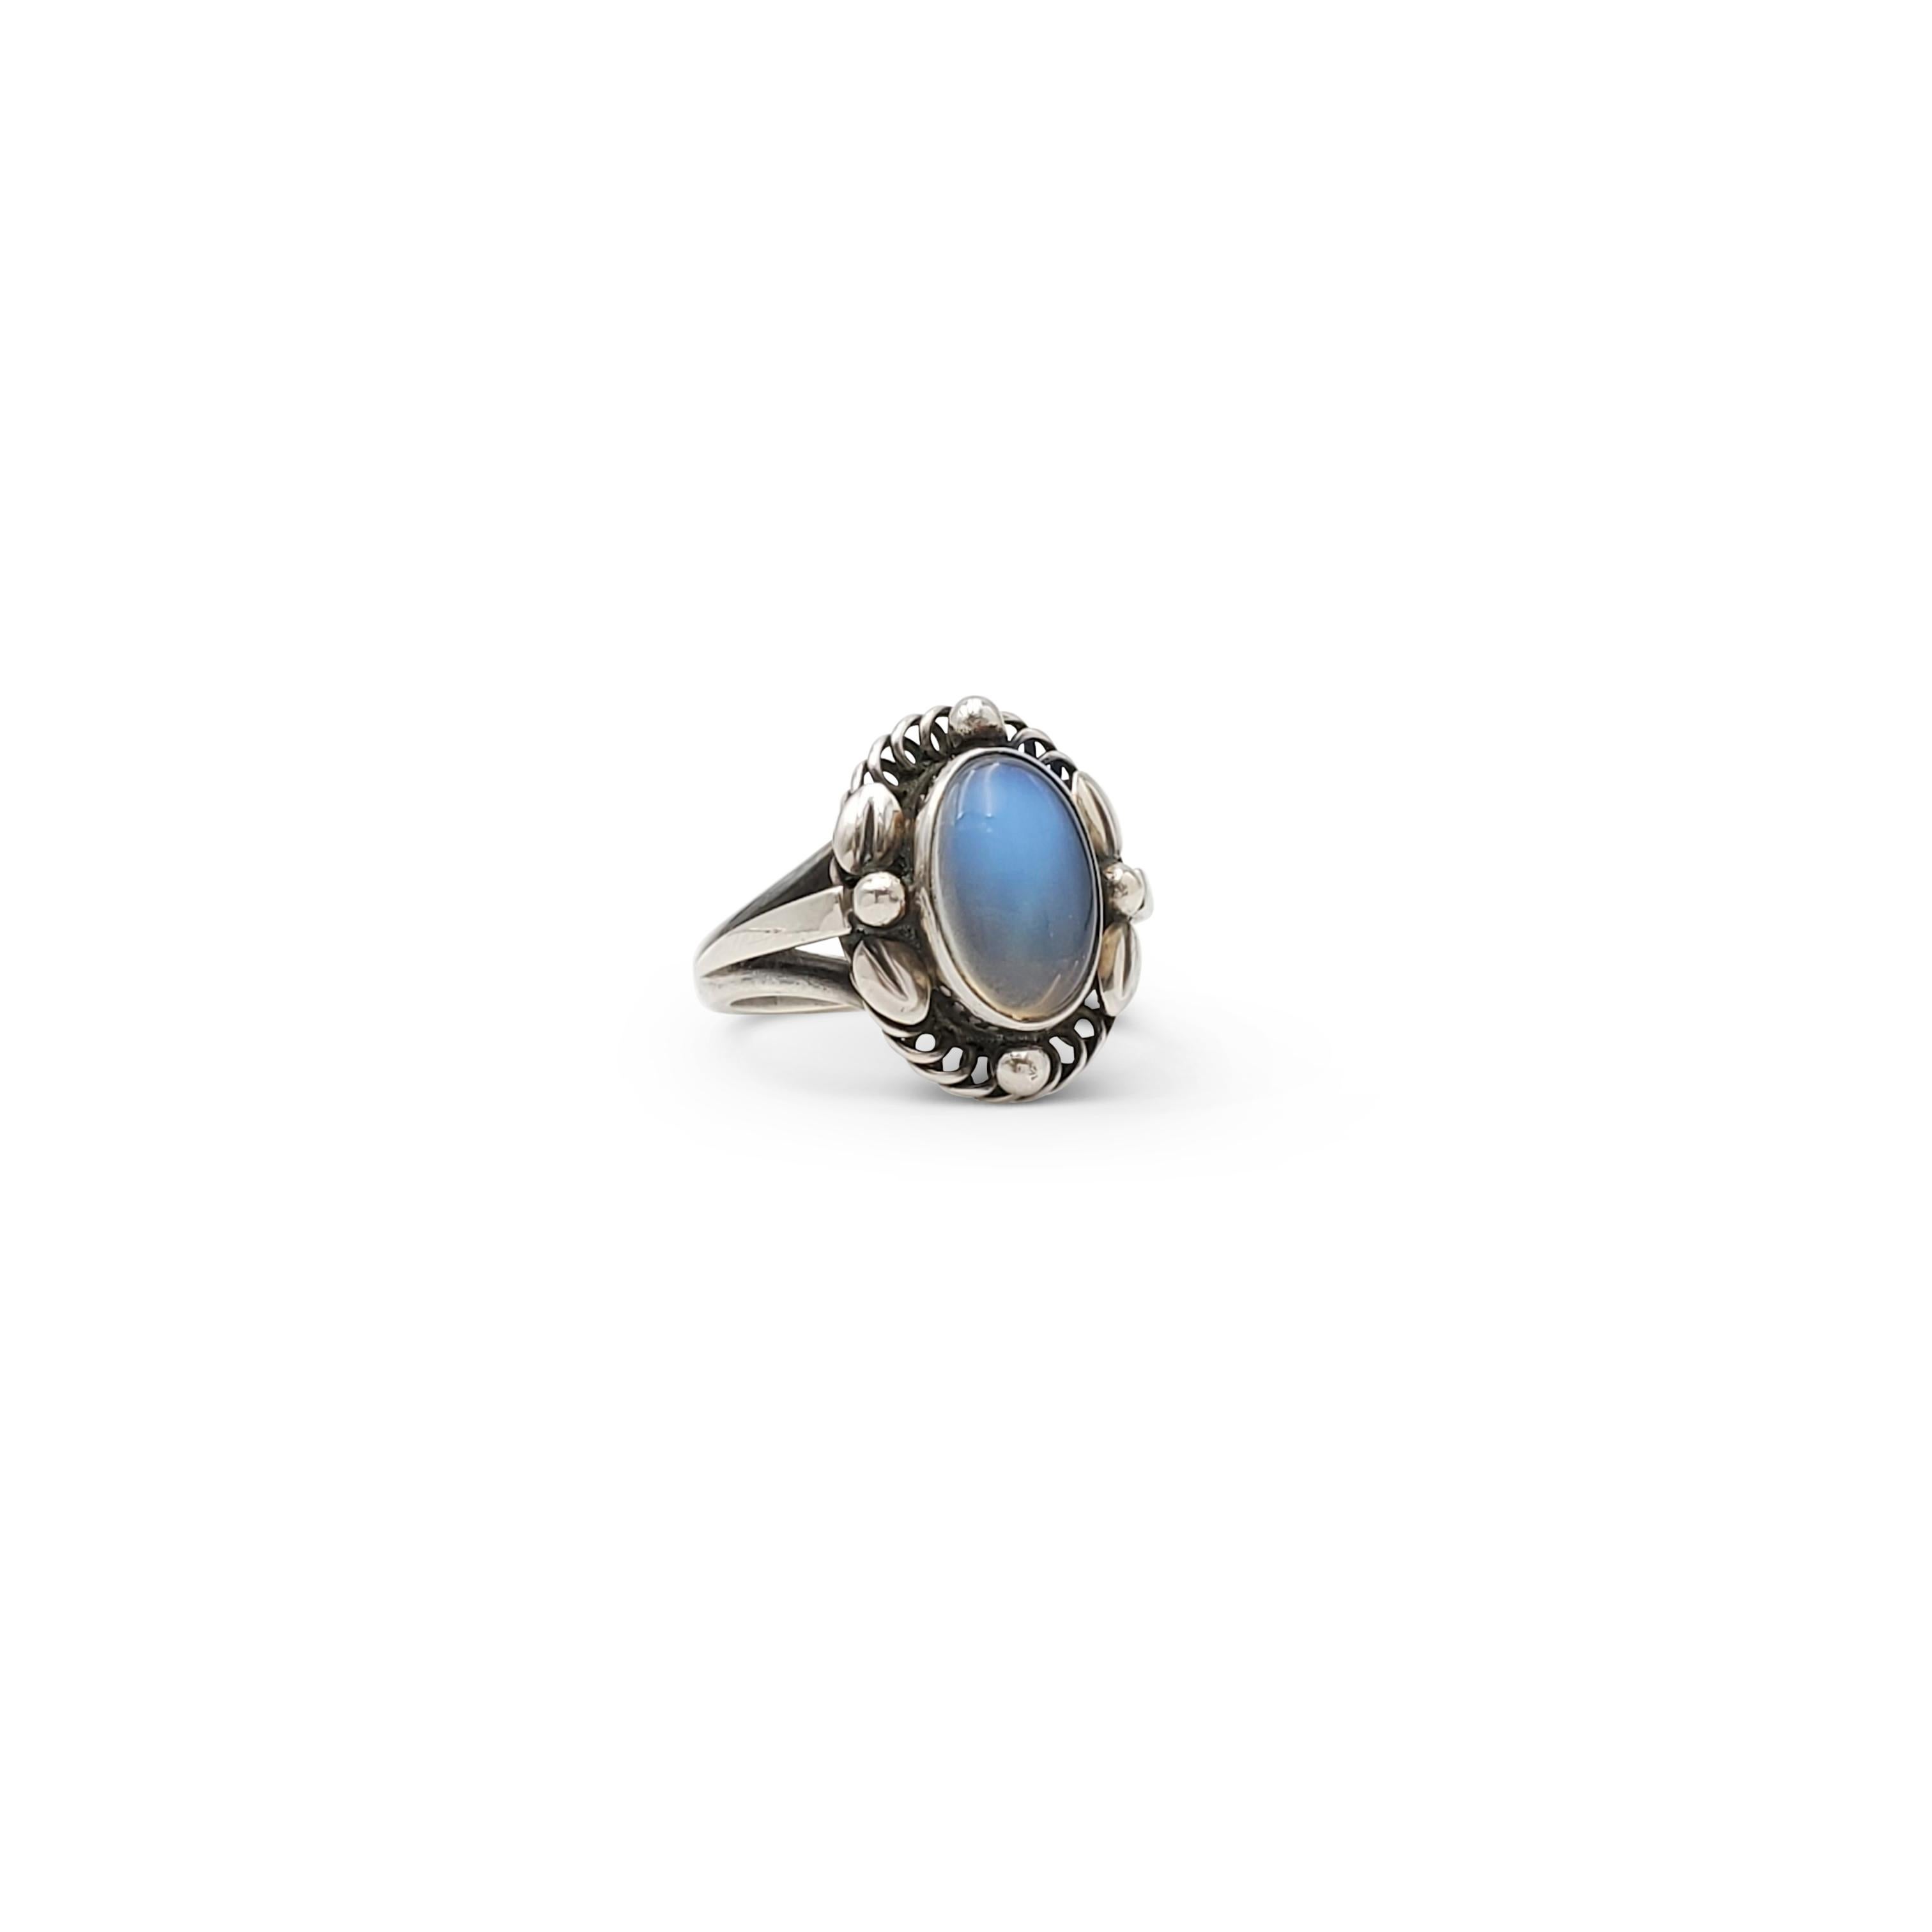 Authentic vintage Georg Jensen sterling silver ring featuring a lively opalescent moonstone. Signed Georg Jensen, 925 S, Denmark, 1A. Ring size 5 1/2. The ring is presented with the original box, no papers. CIRCA 1960s.